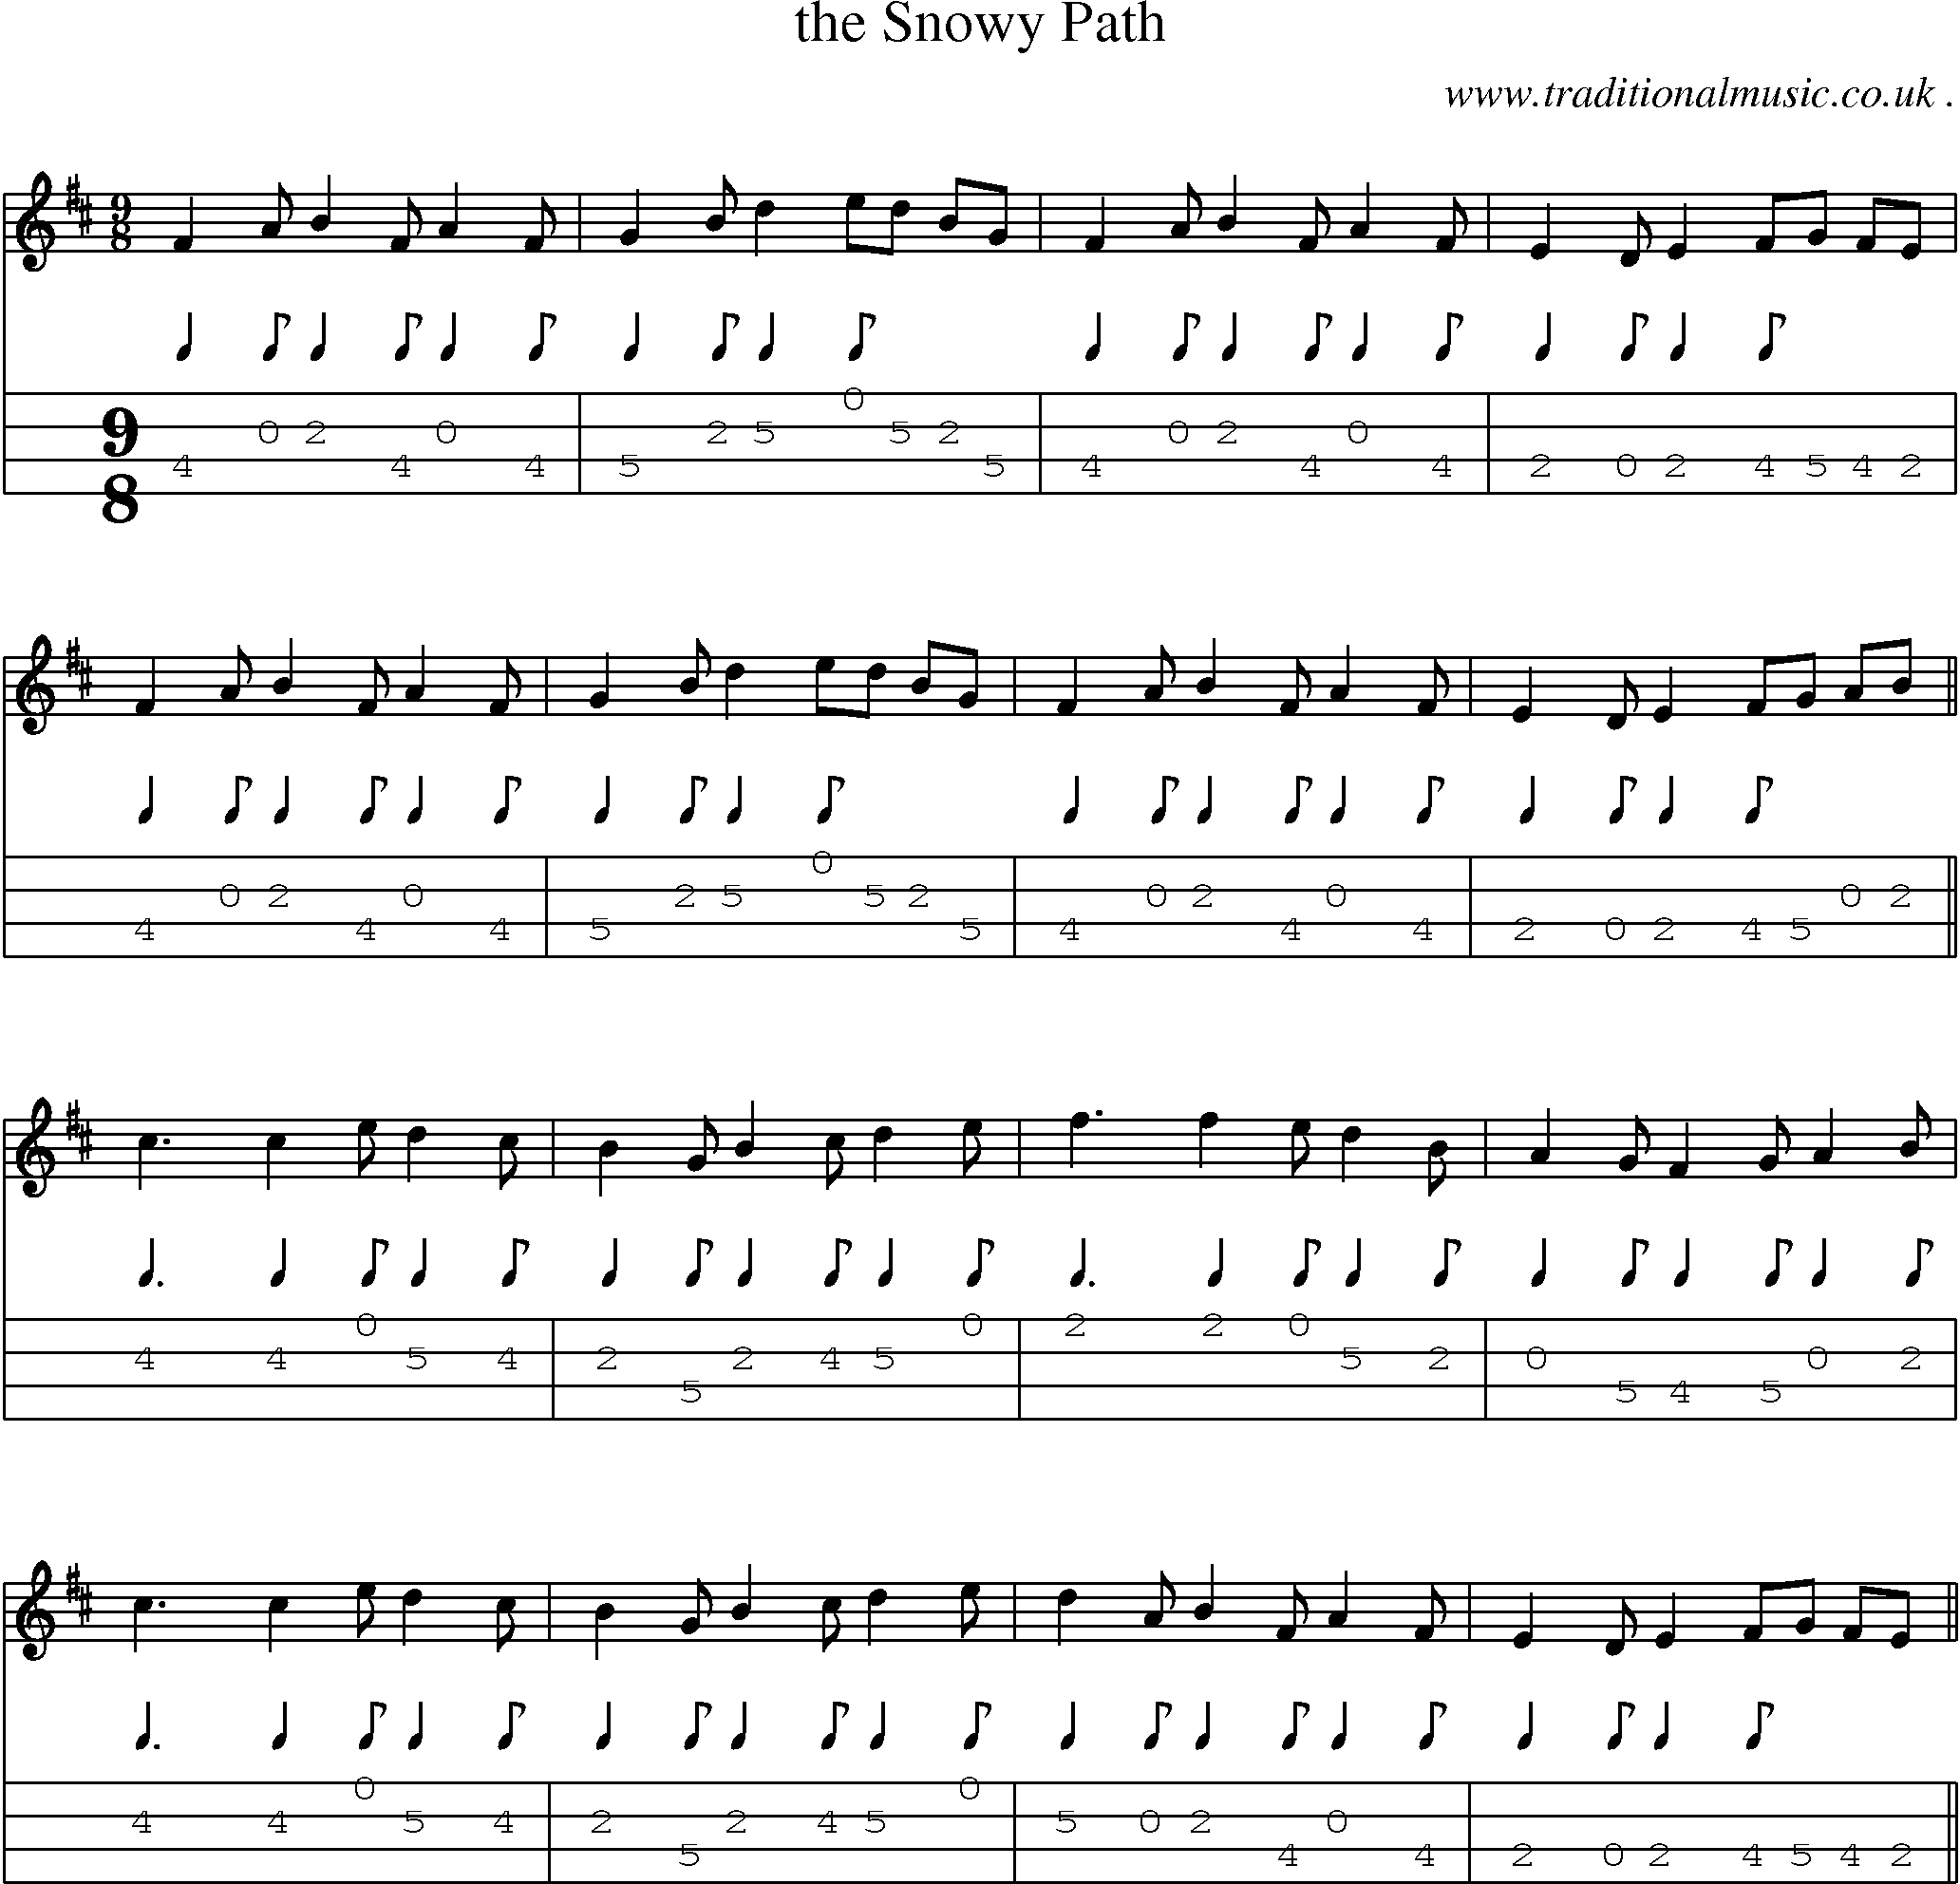 Sheet-Music and Mandolin Tabs for The Snowy Path